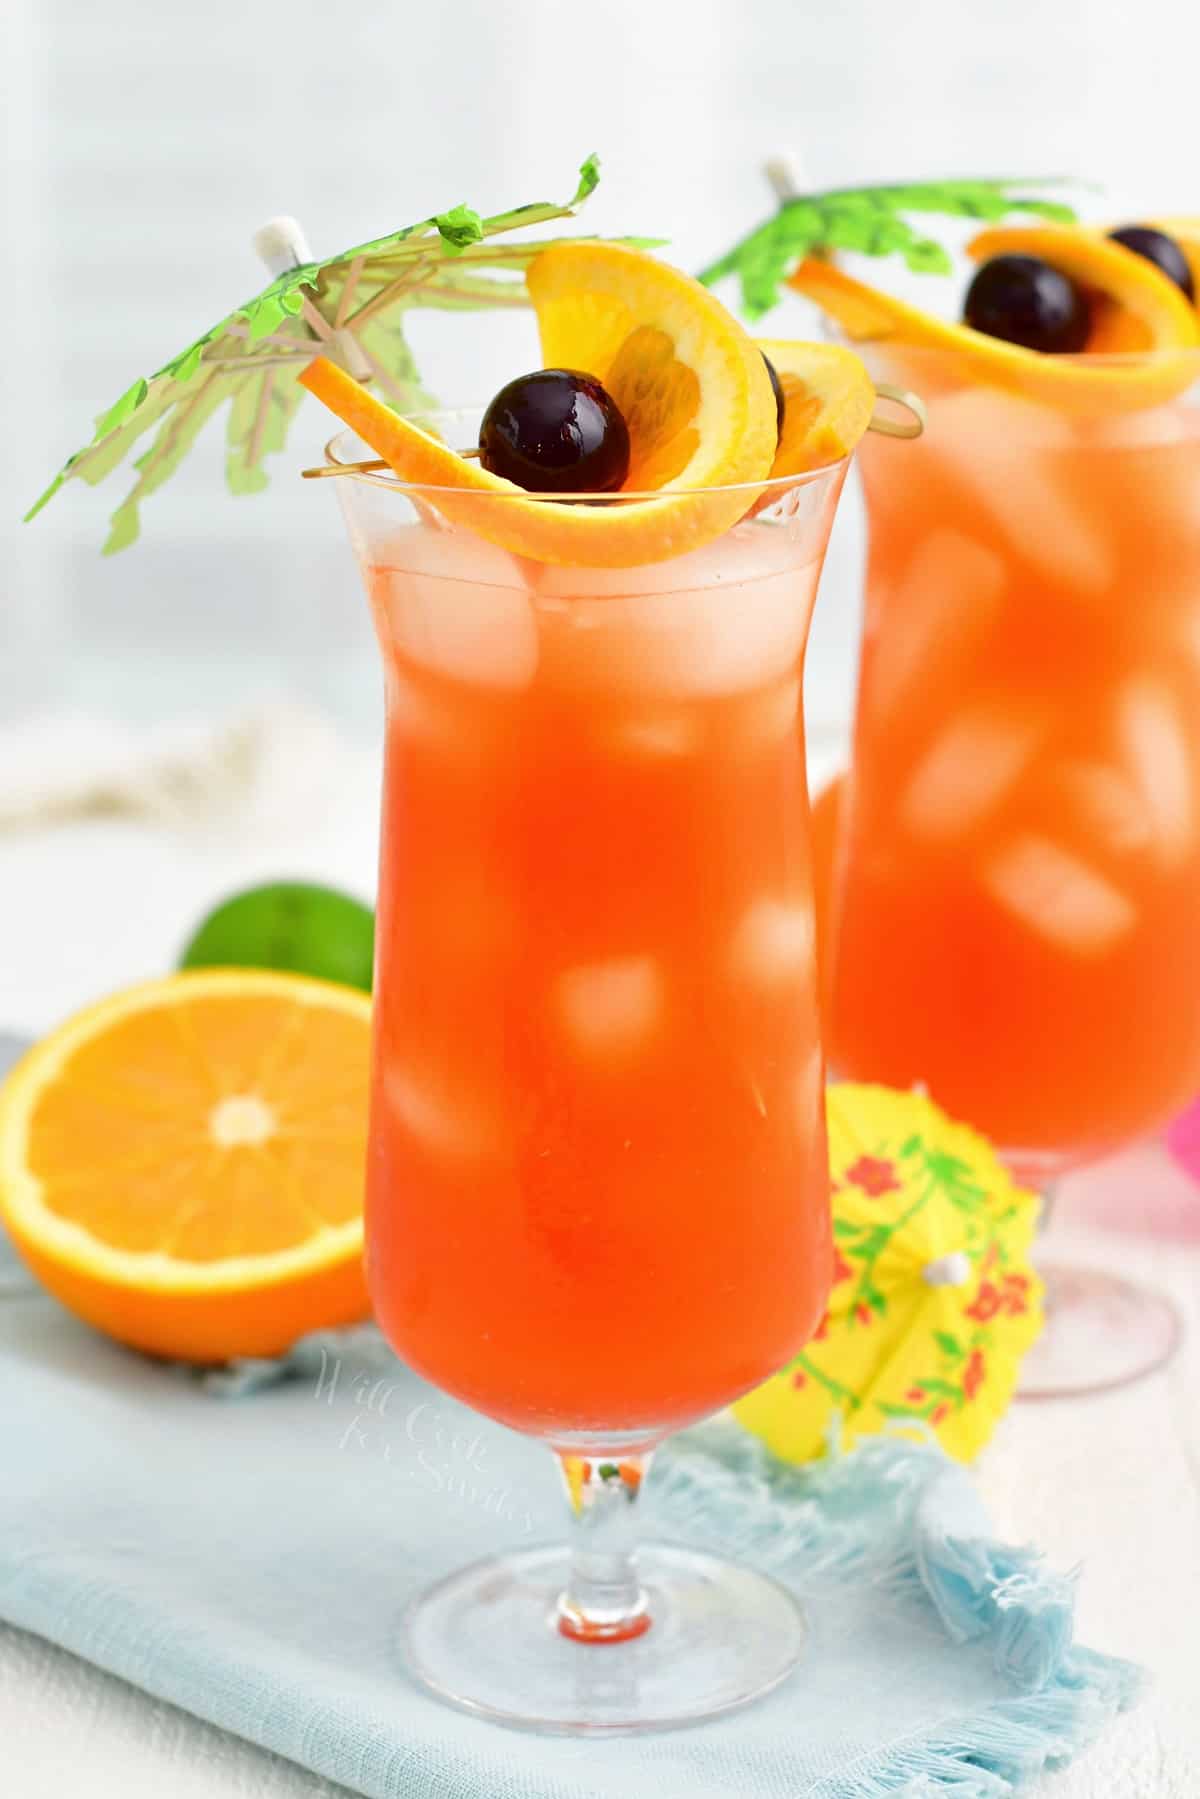 Rum Punch Easy Tropical Cocktail Recipe That #39 s Sweet and Refreshing